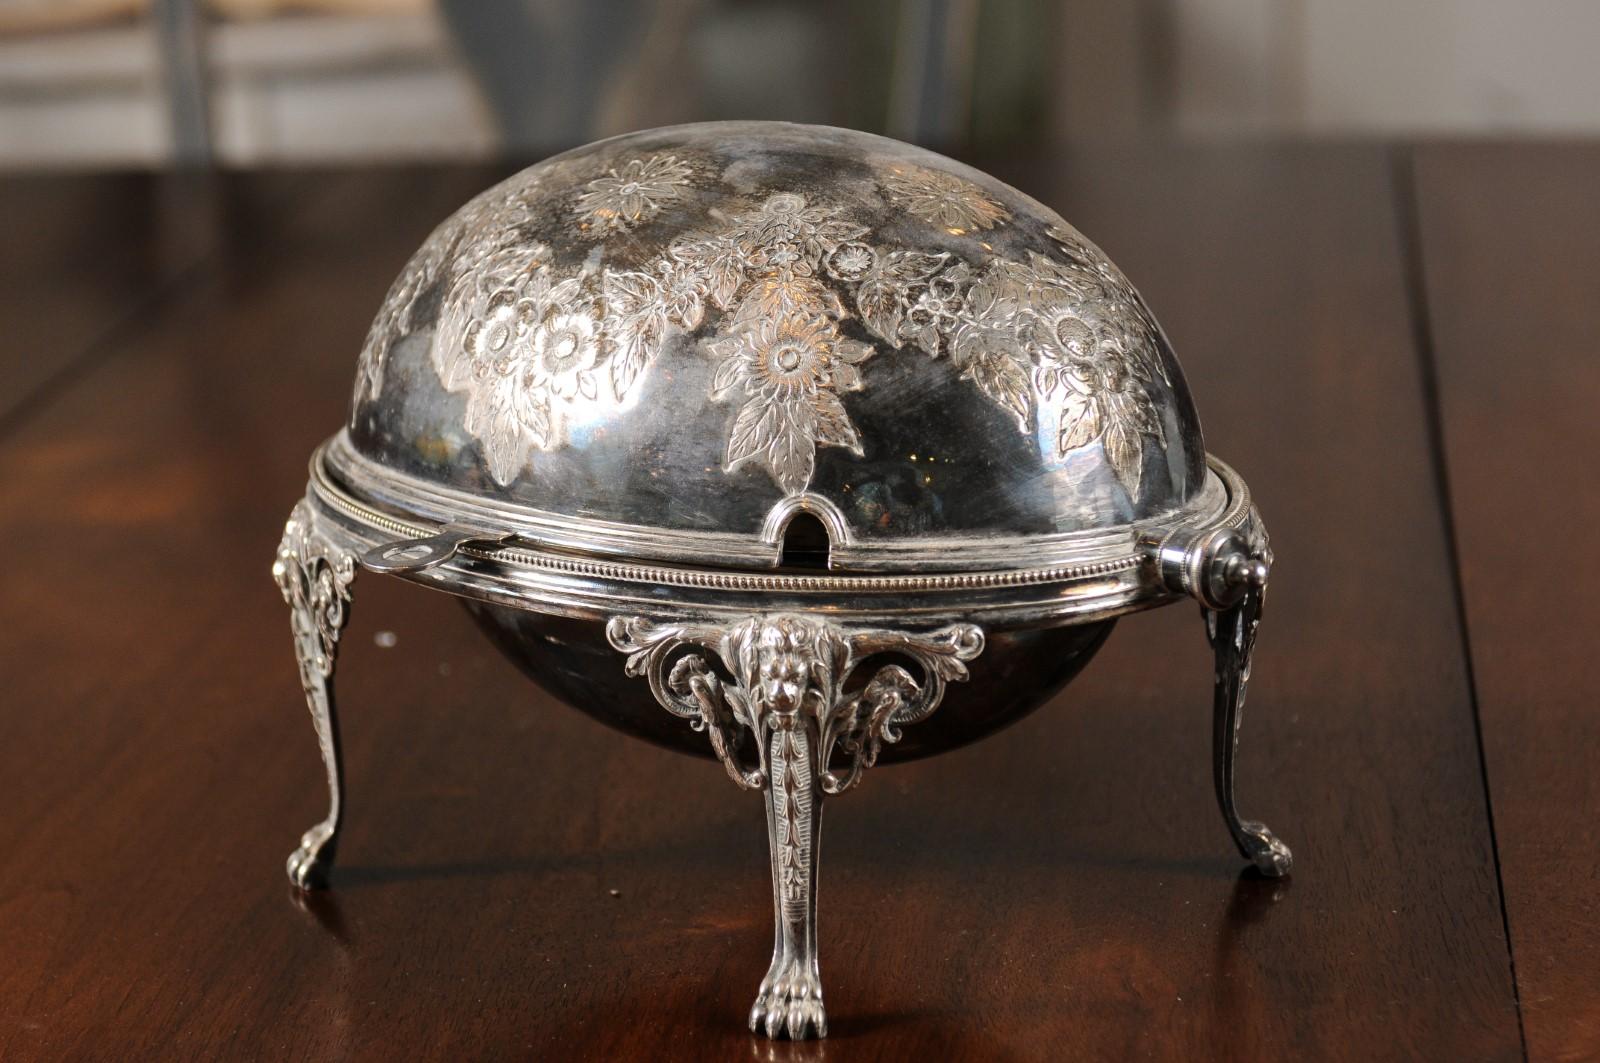 English 19th Century Silver Plated Asparagus Dish Warmer with Cabriole Legs For Sale 6